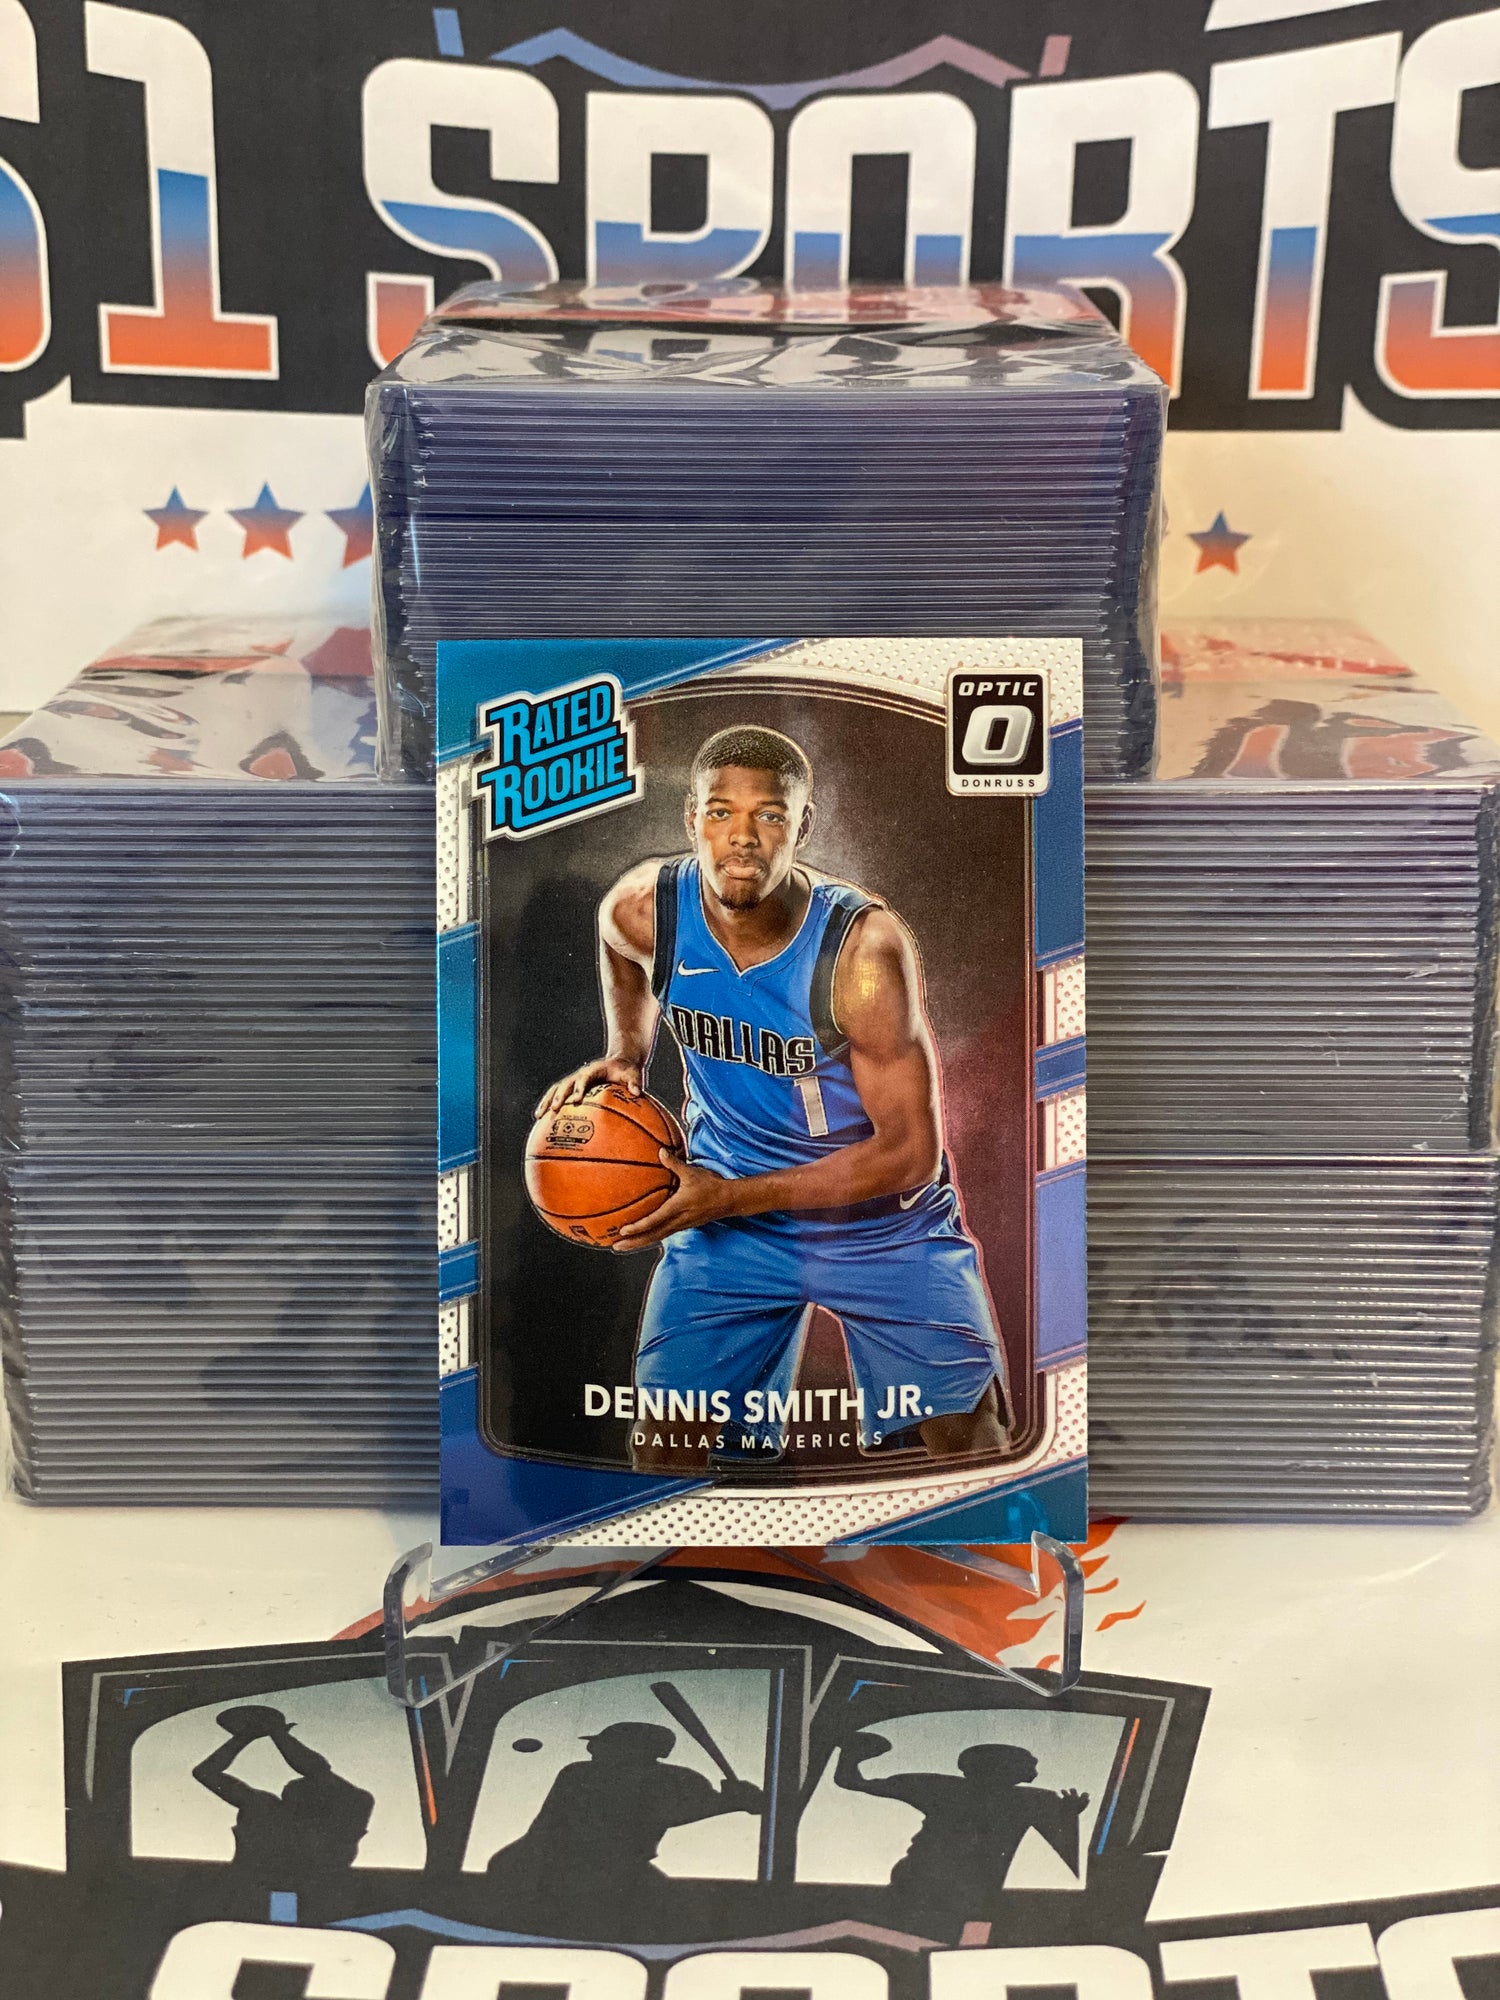 2017 Donruss Optic (Rated Rookie) Dennis Smith Jr. #192